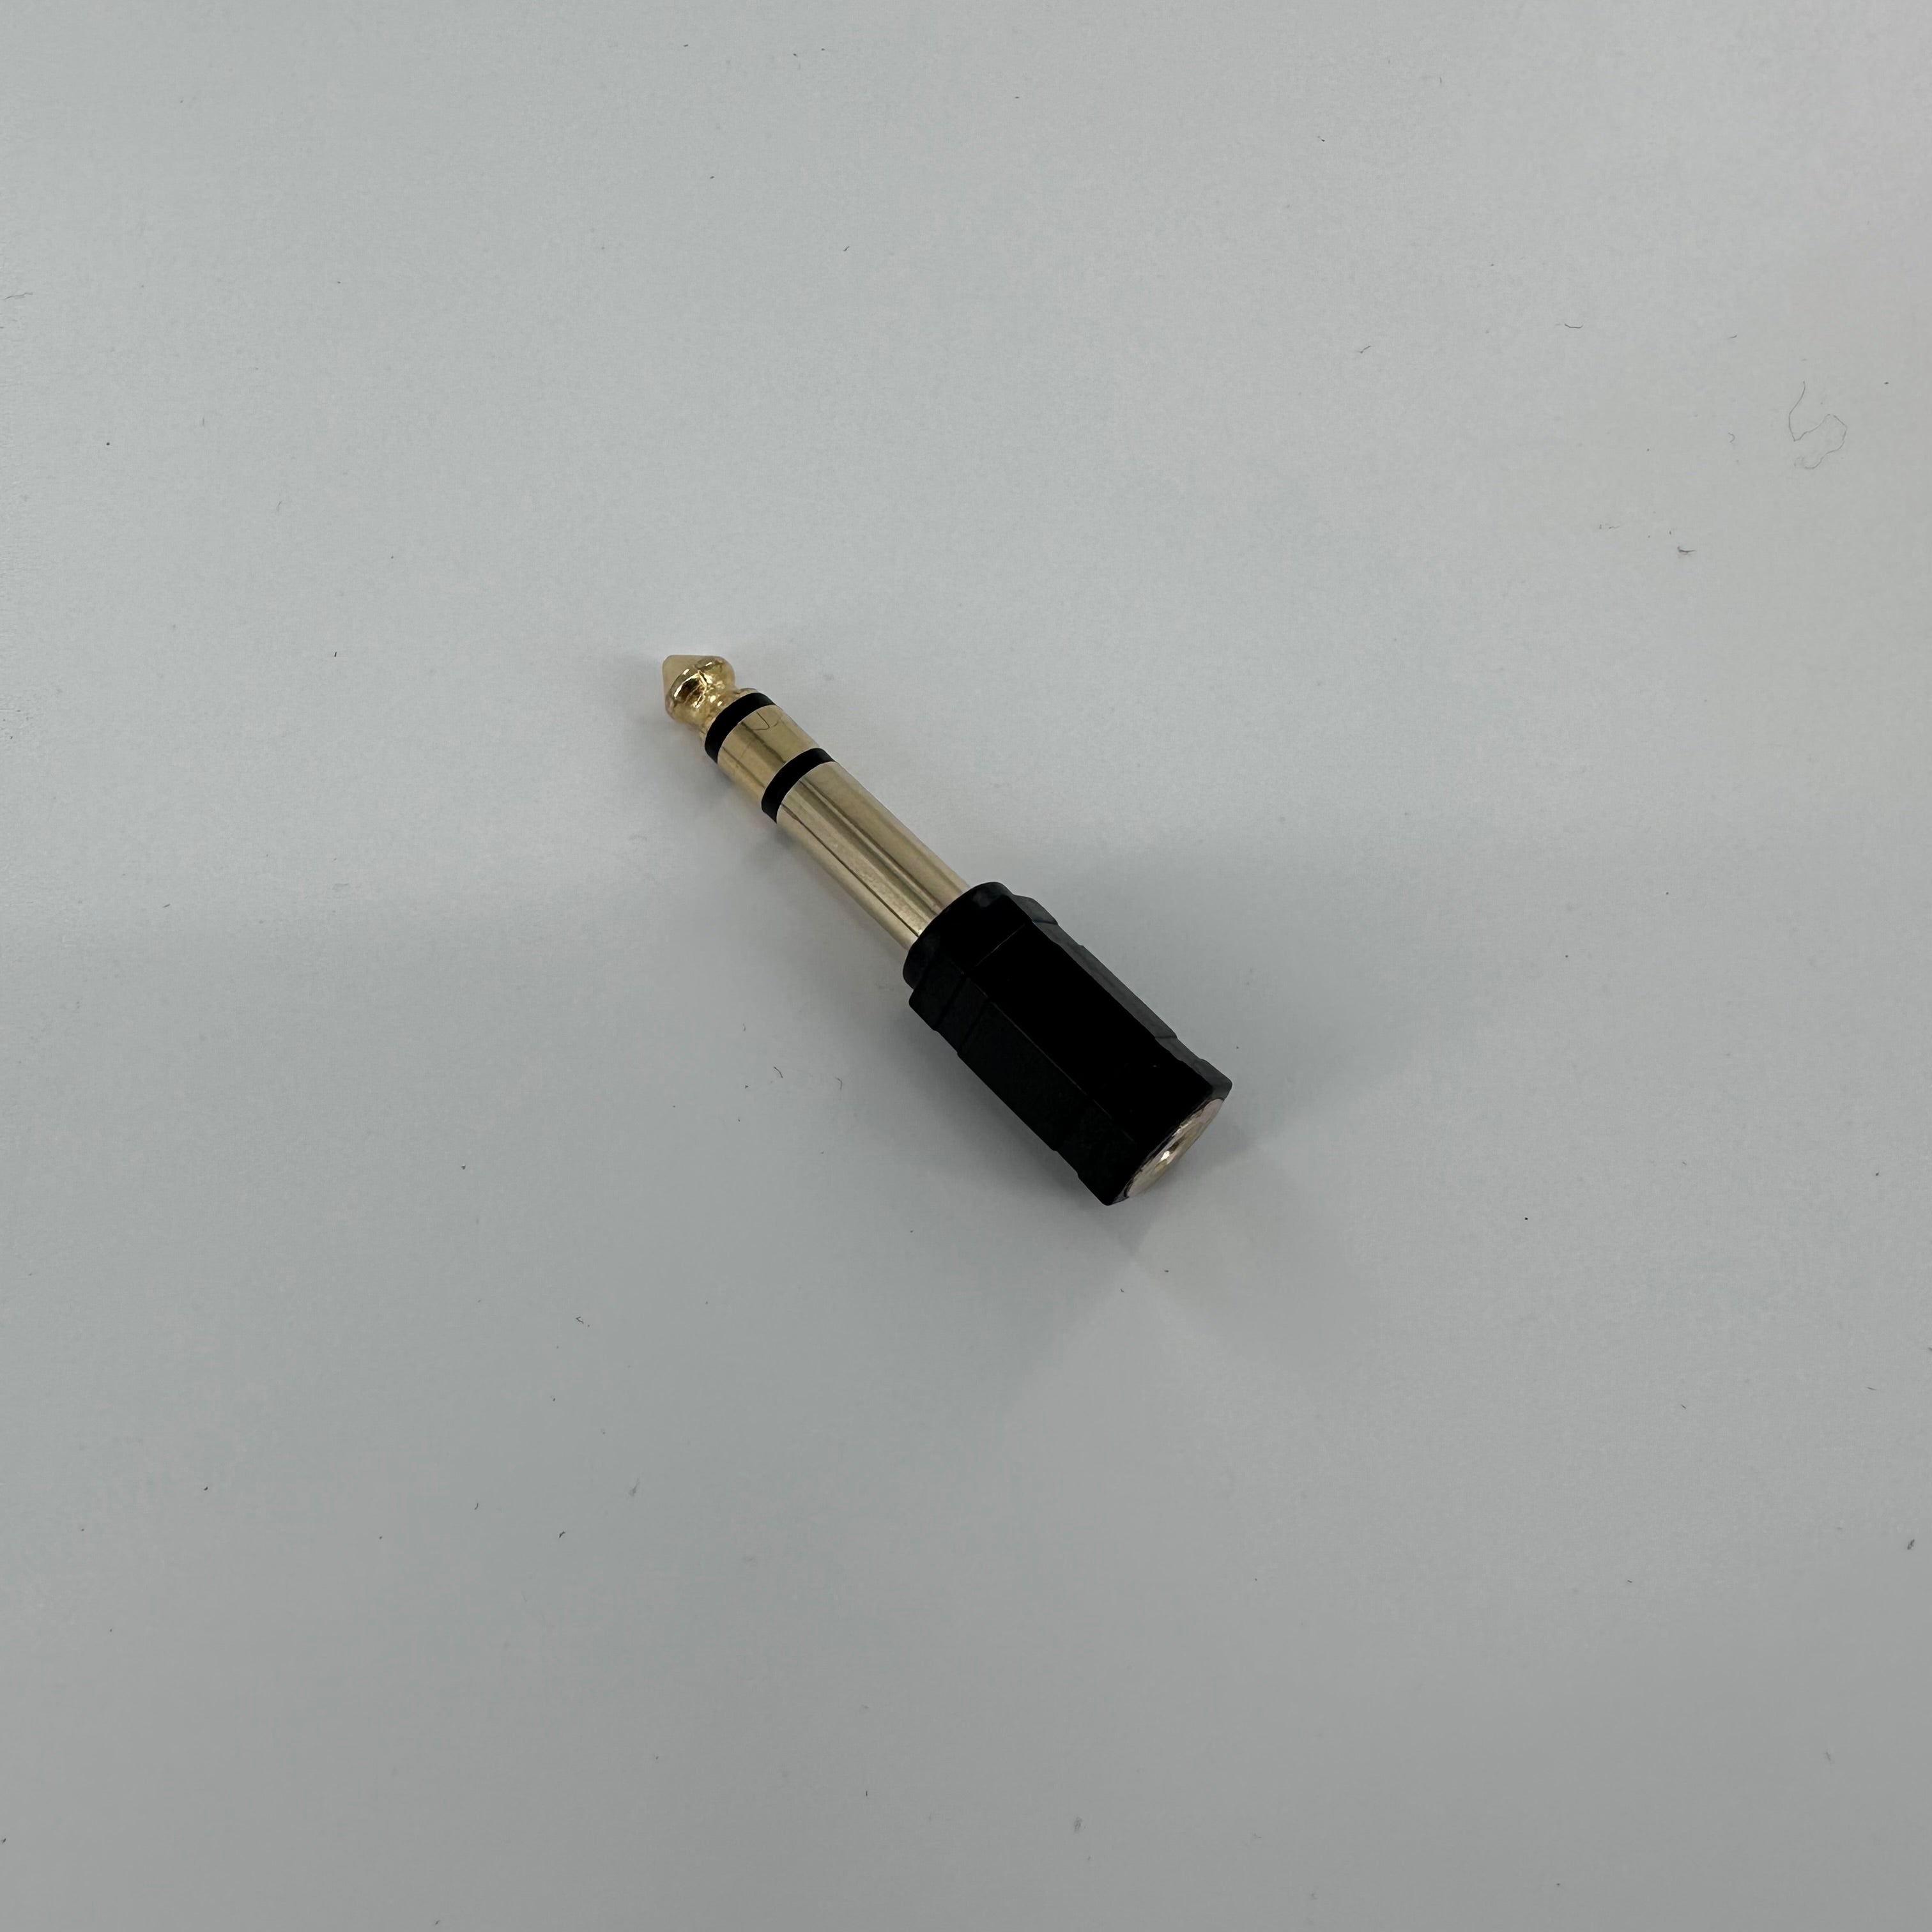 1/4" TRS stereo male plug to 3.5mm stereo female jack